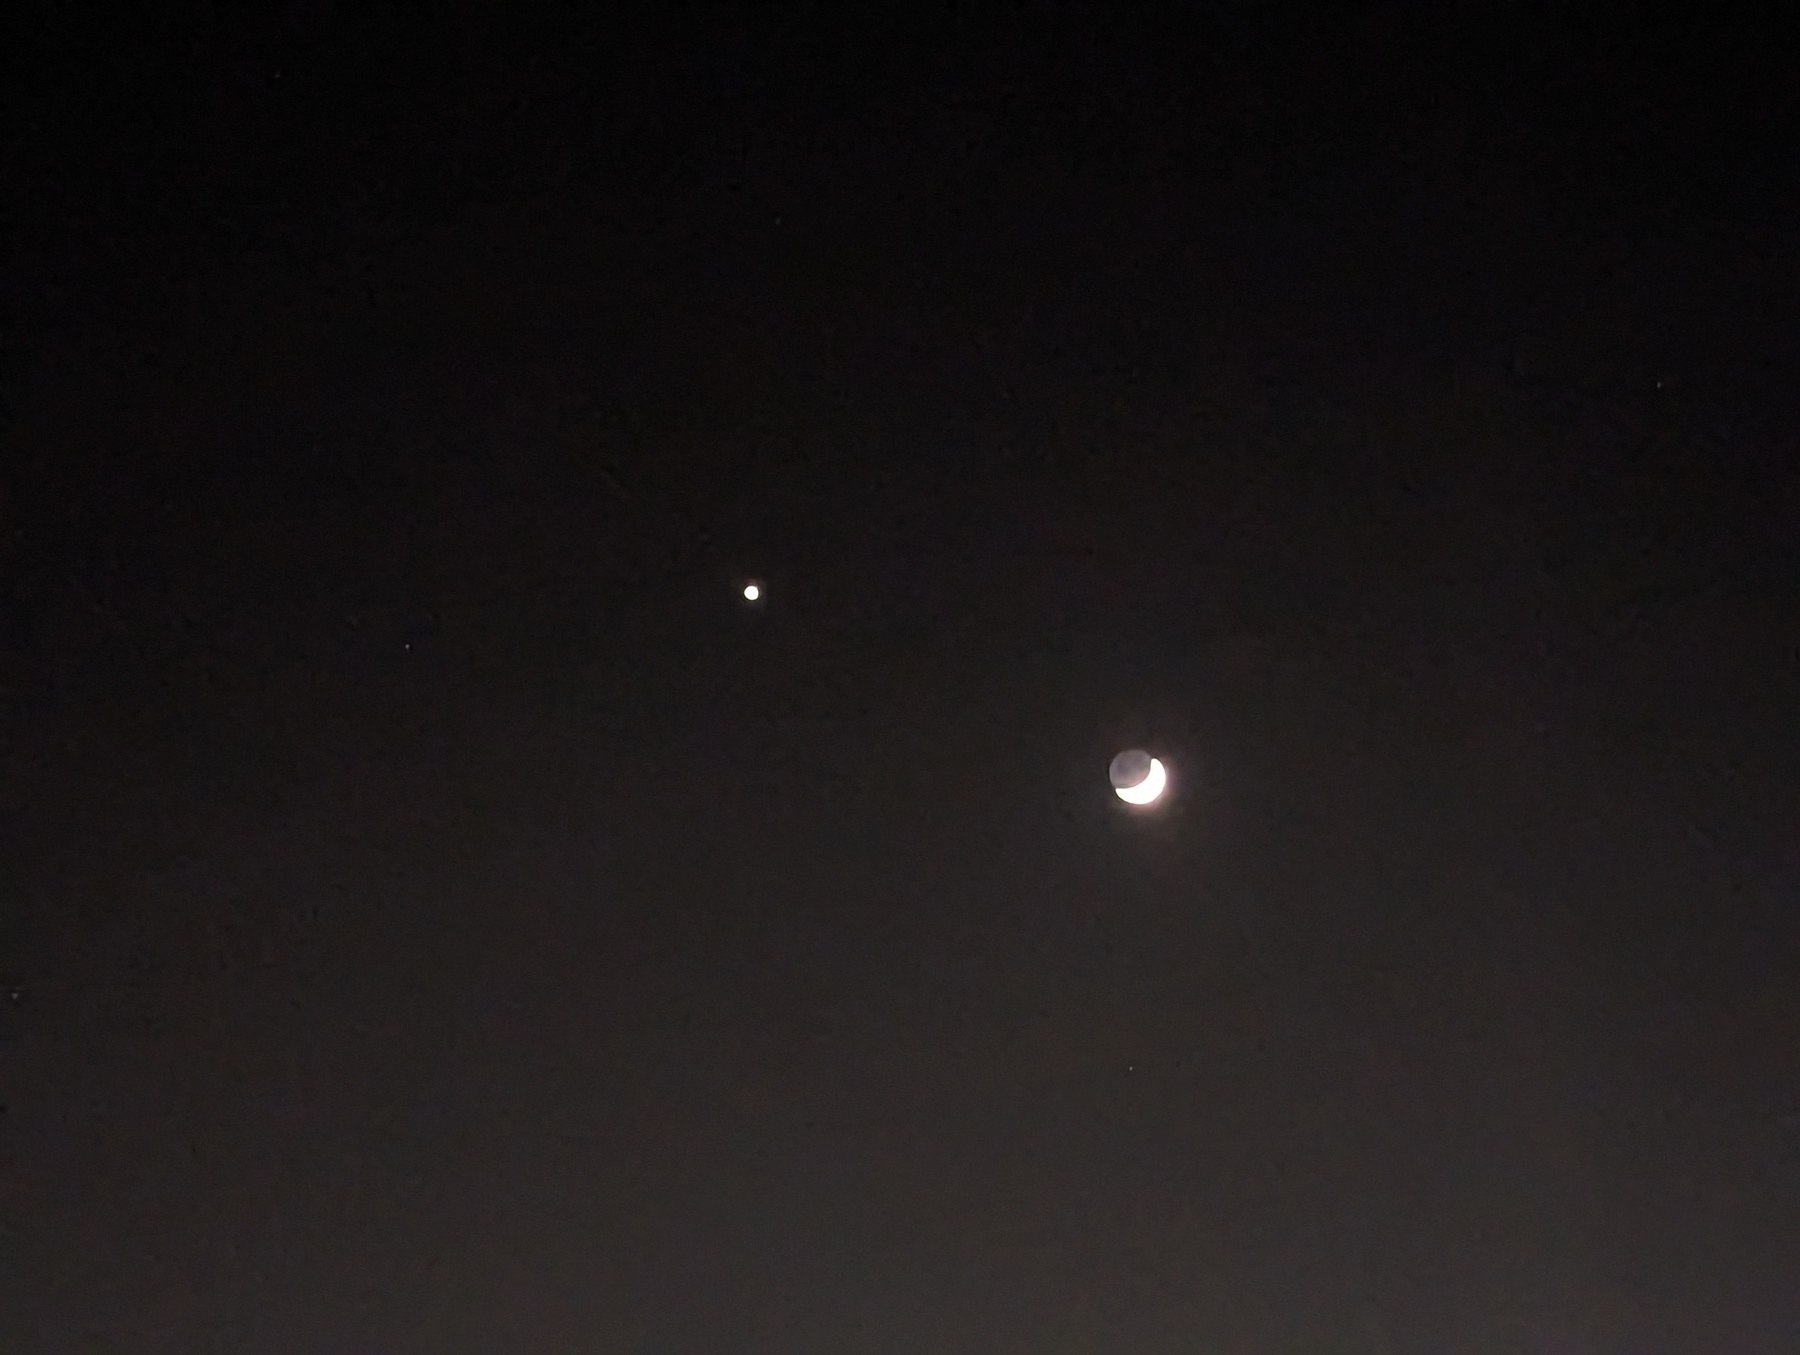 A cropped view of the planet Venus in evening star mode and the crescent moon a couple of days past newness, hanging out about three degrees apart in the sign of Cancer, as seen against clear dark sky Monday, May 22, 2023 in San Pablo, California.